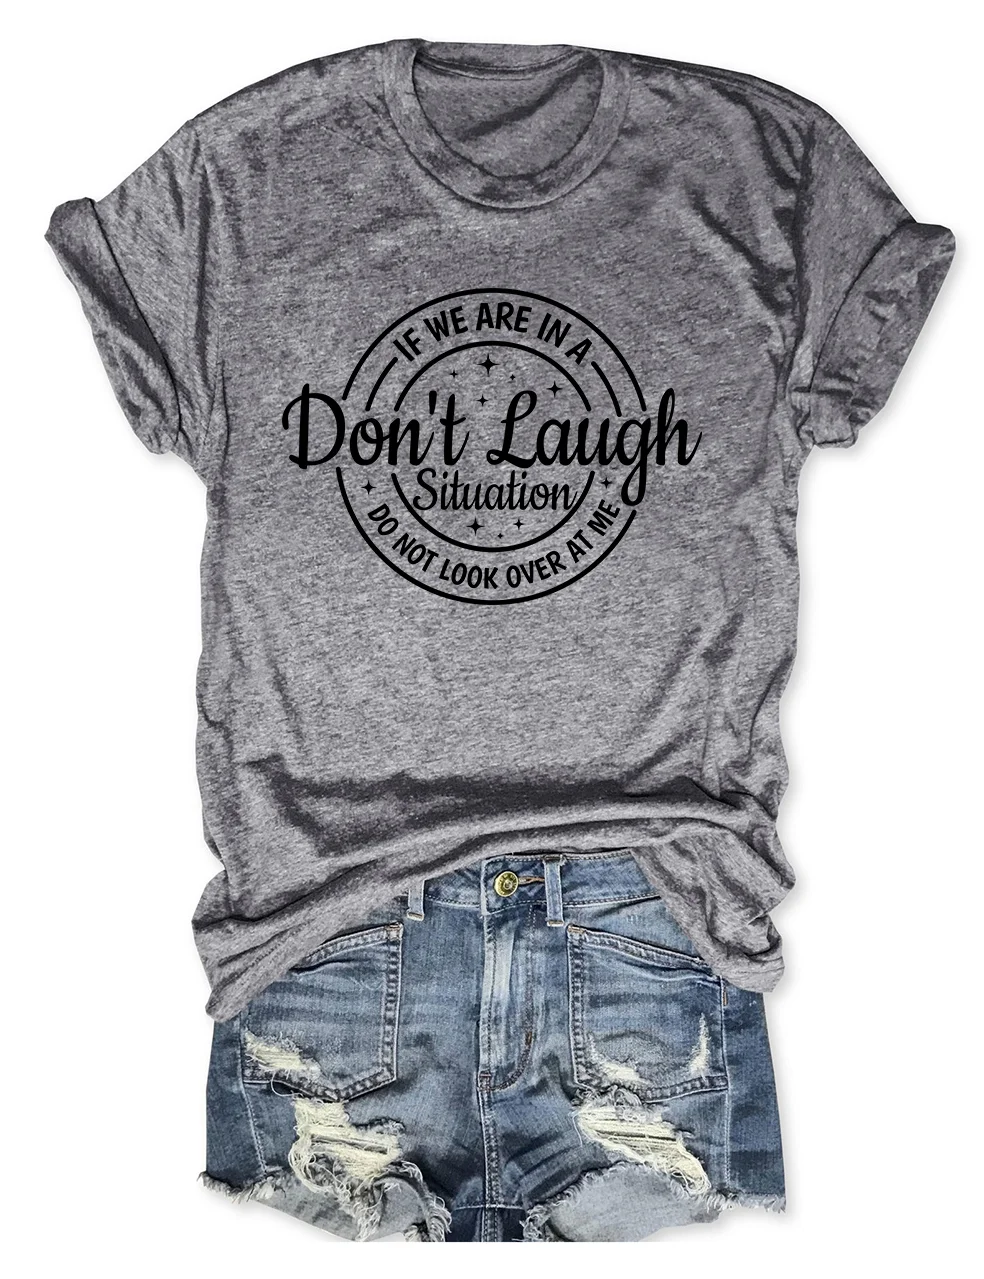 If We Are In A Don't Laugh Situation T-Shirt